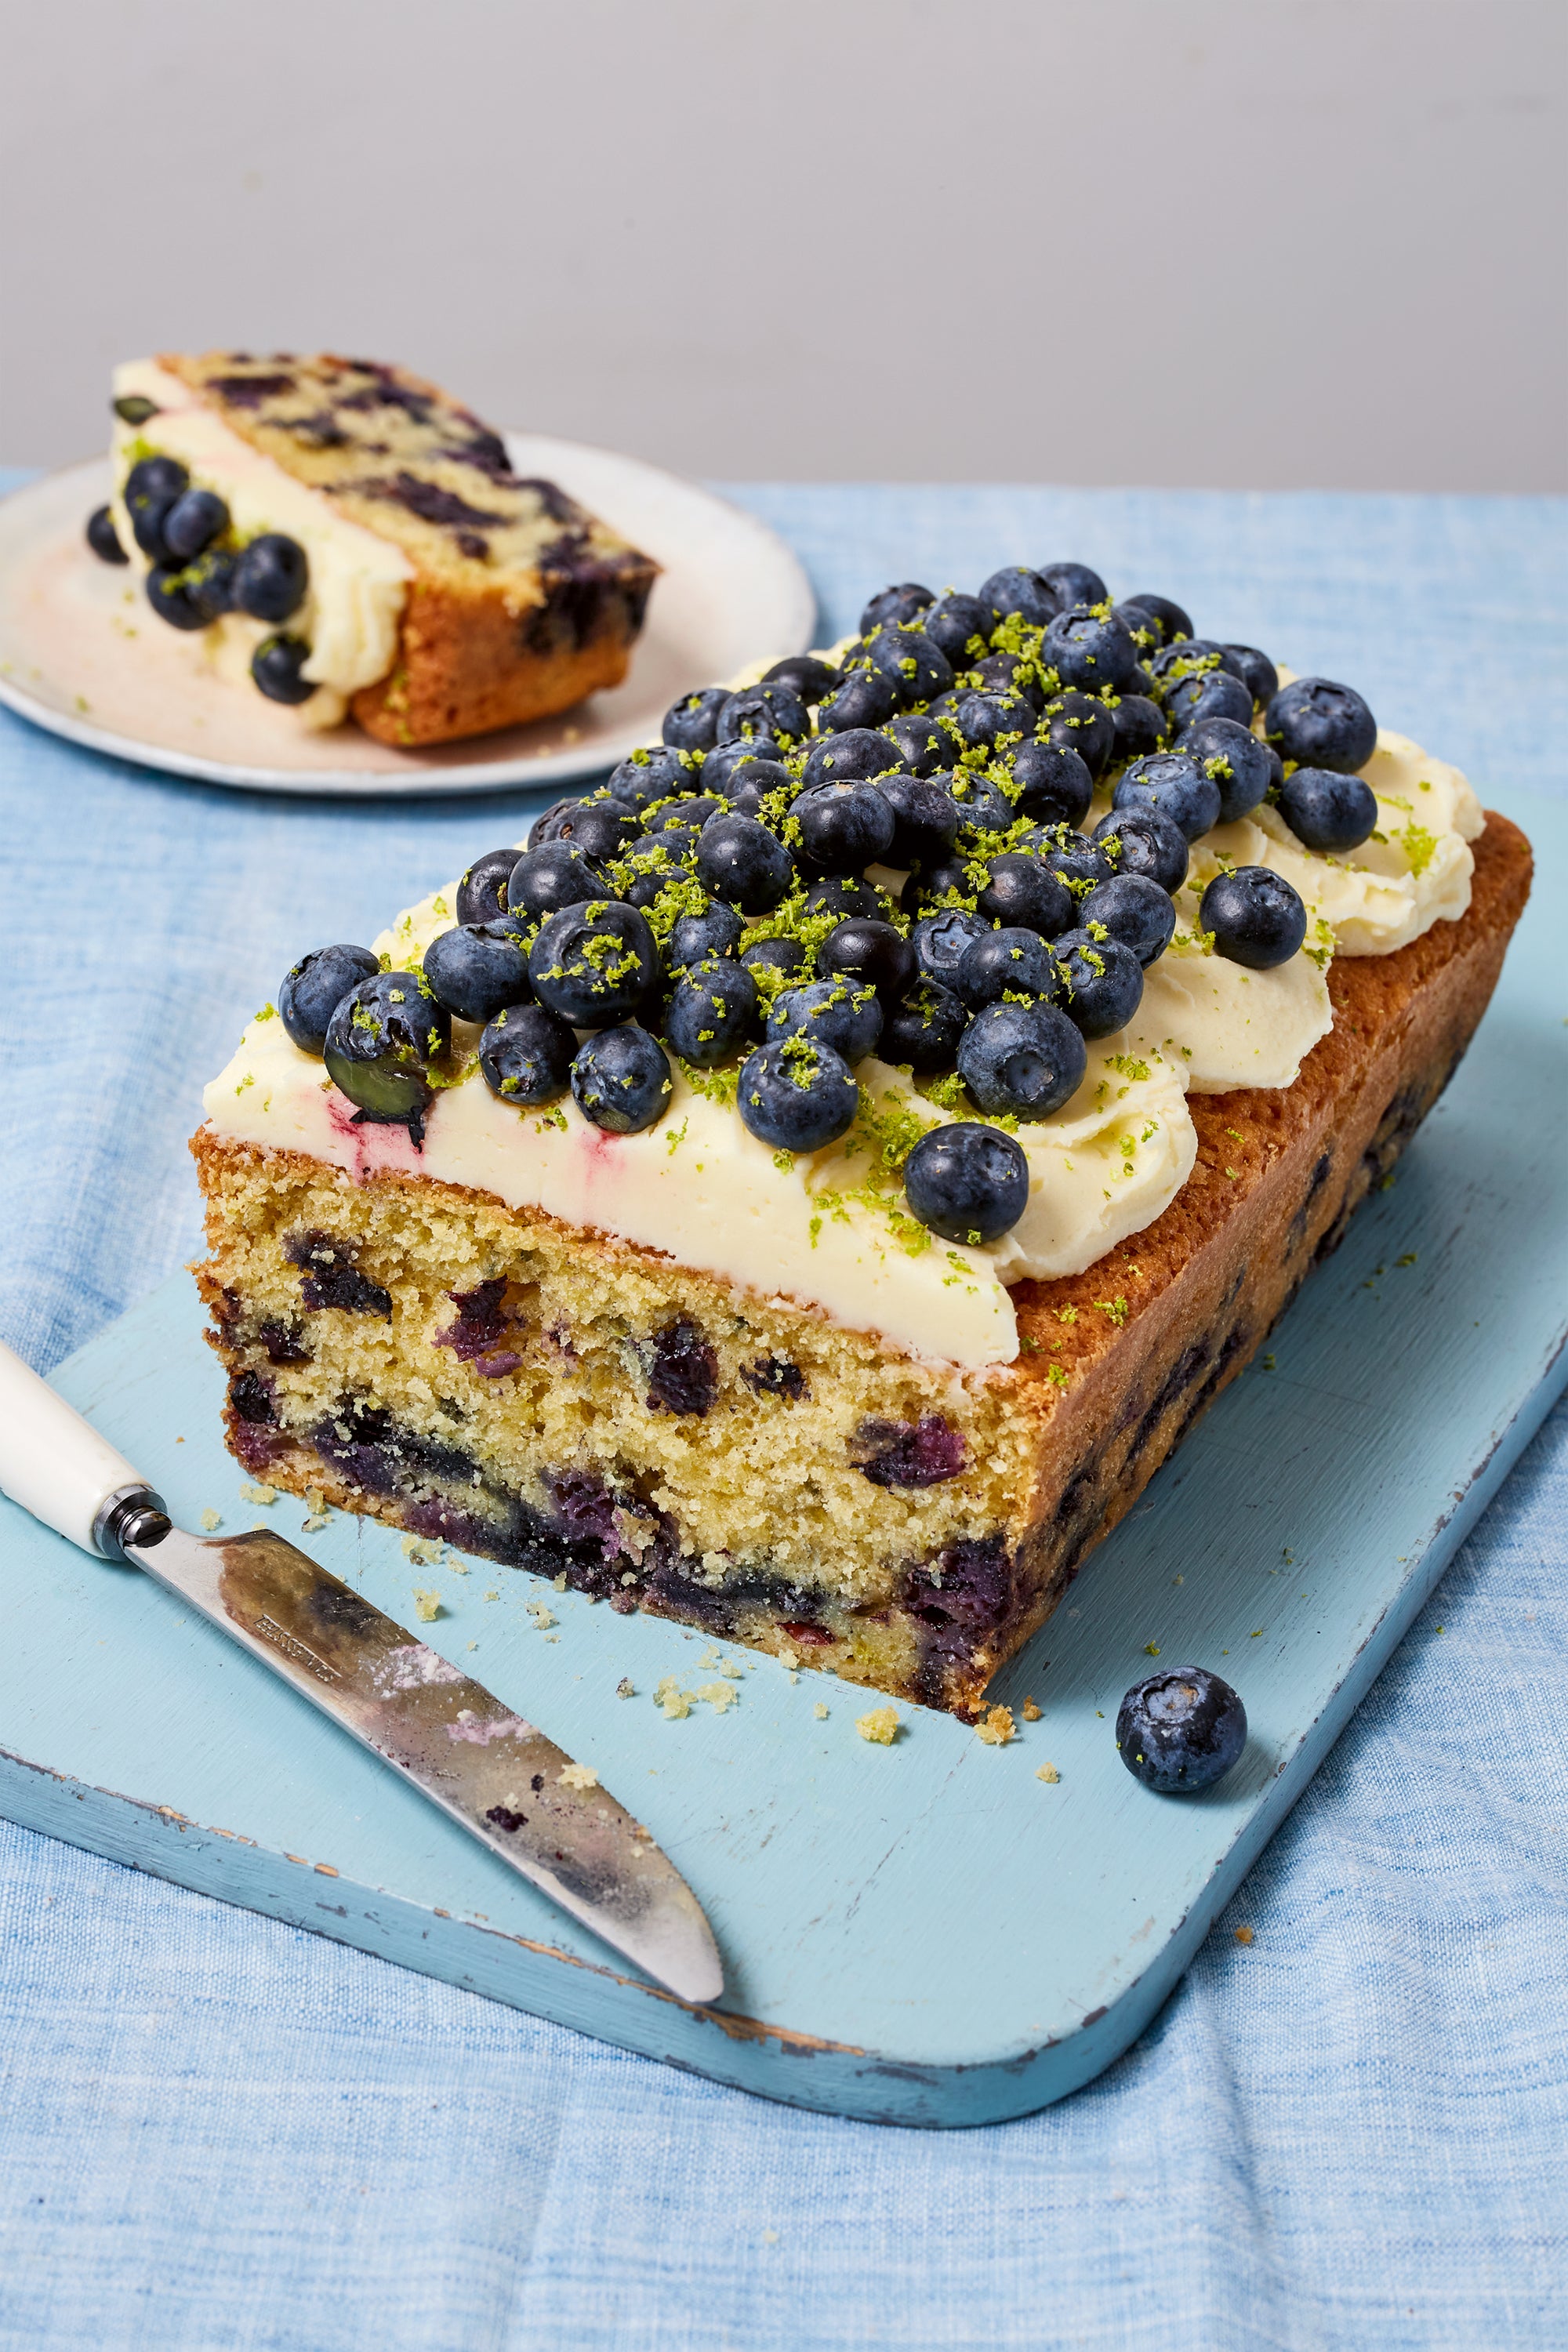 Baking with blueberries always brings out their flavour and creates a delicious texture